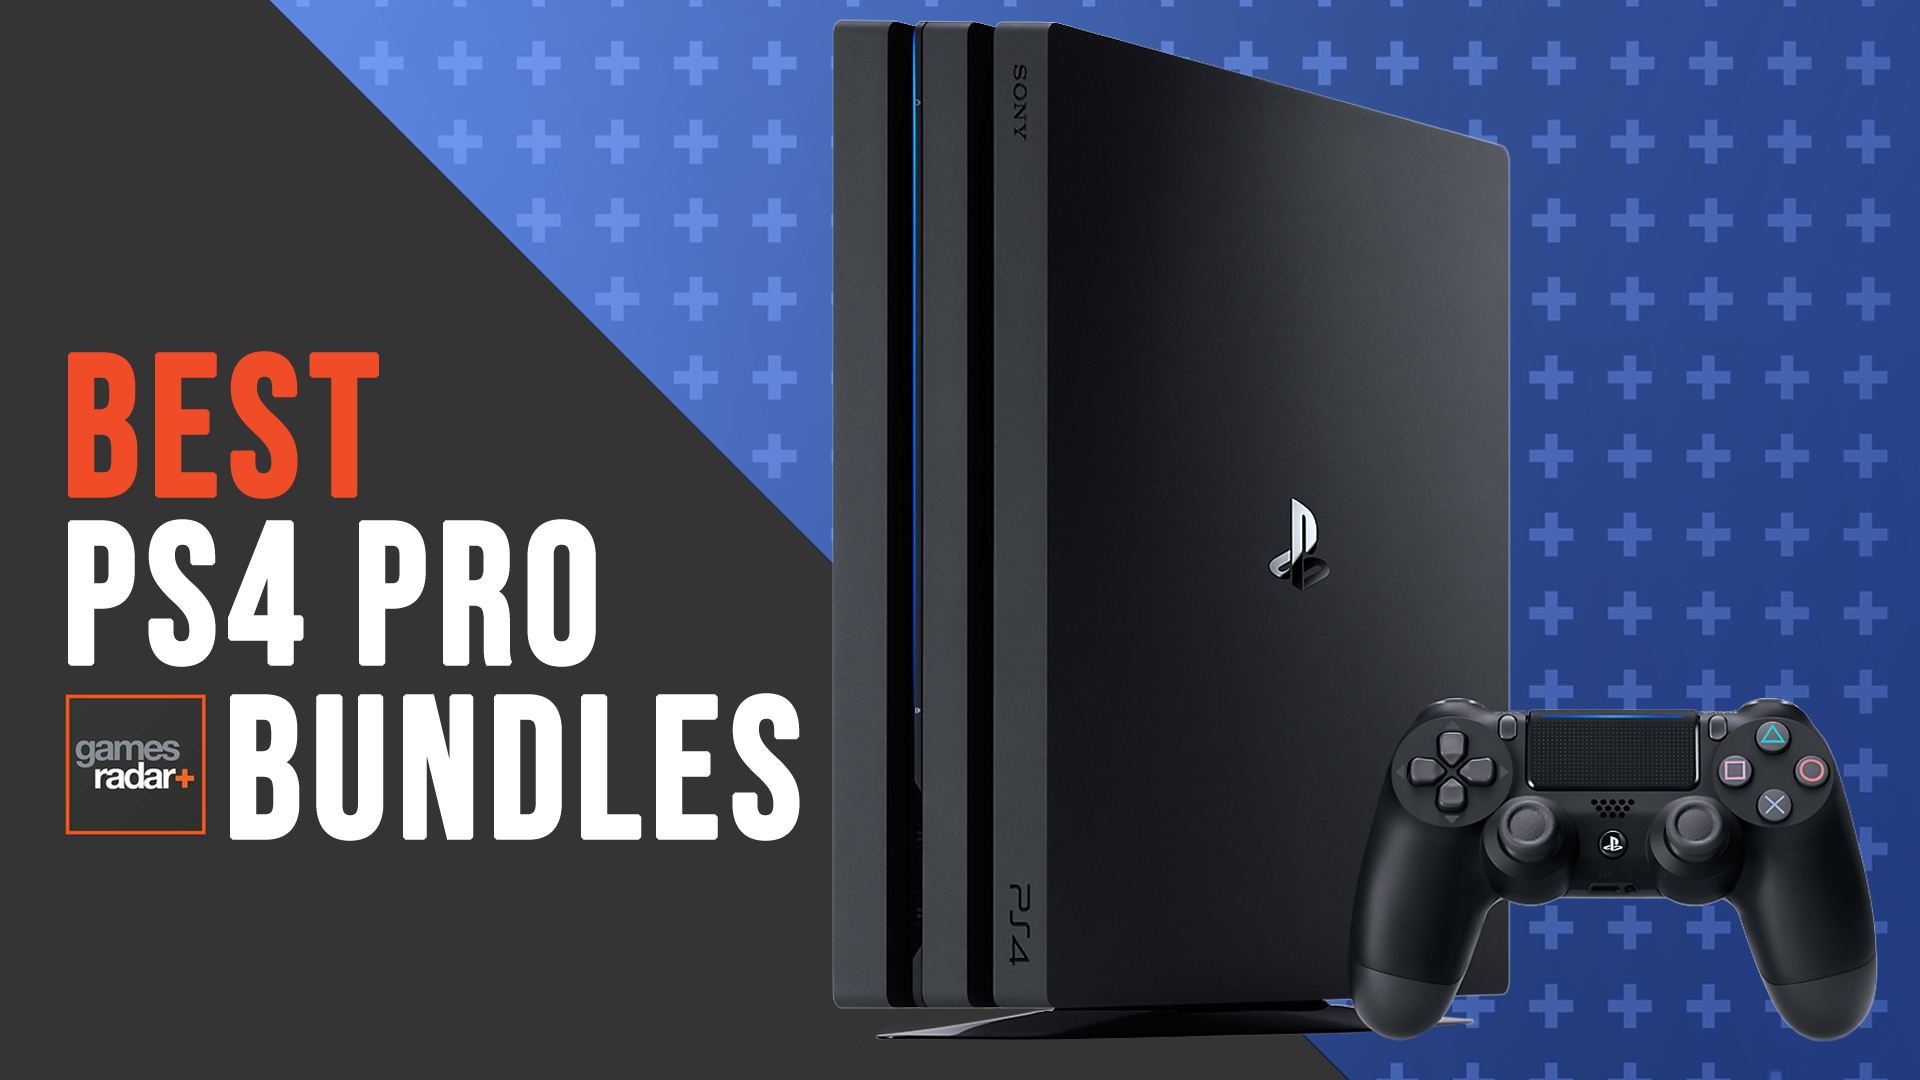 Price Of A Ps4 Pro Clearance, 51% OFF | www.ingeniovirtual.com